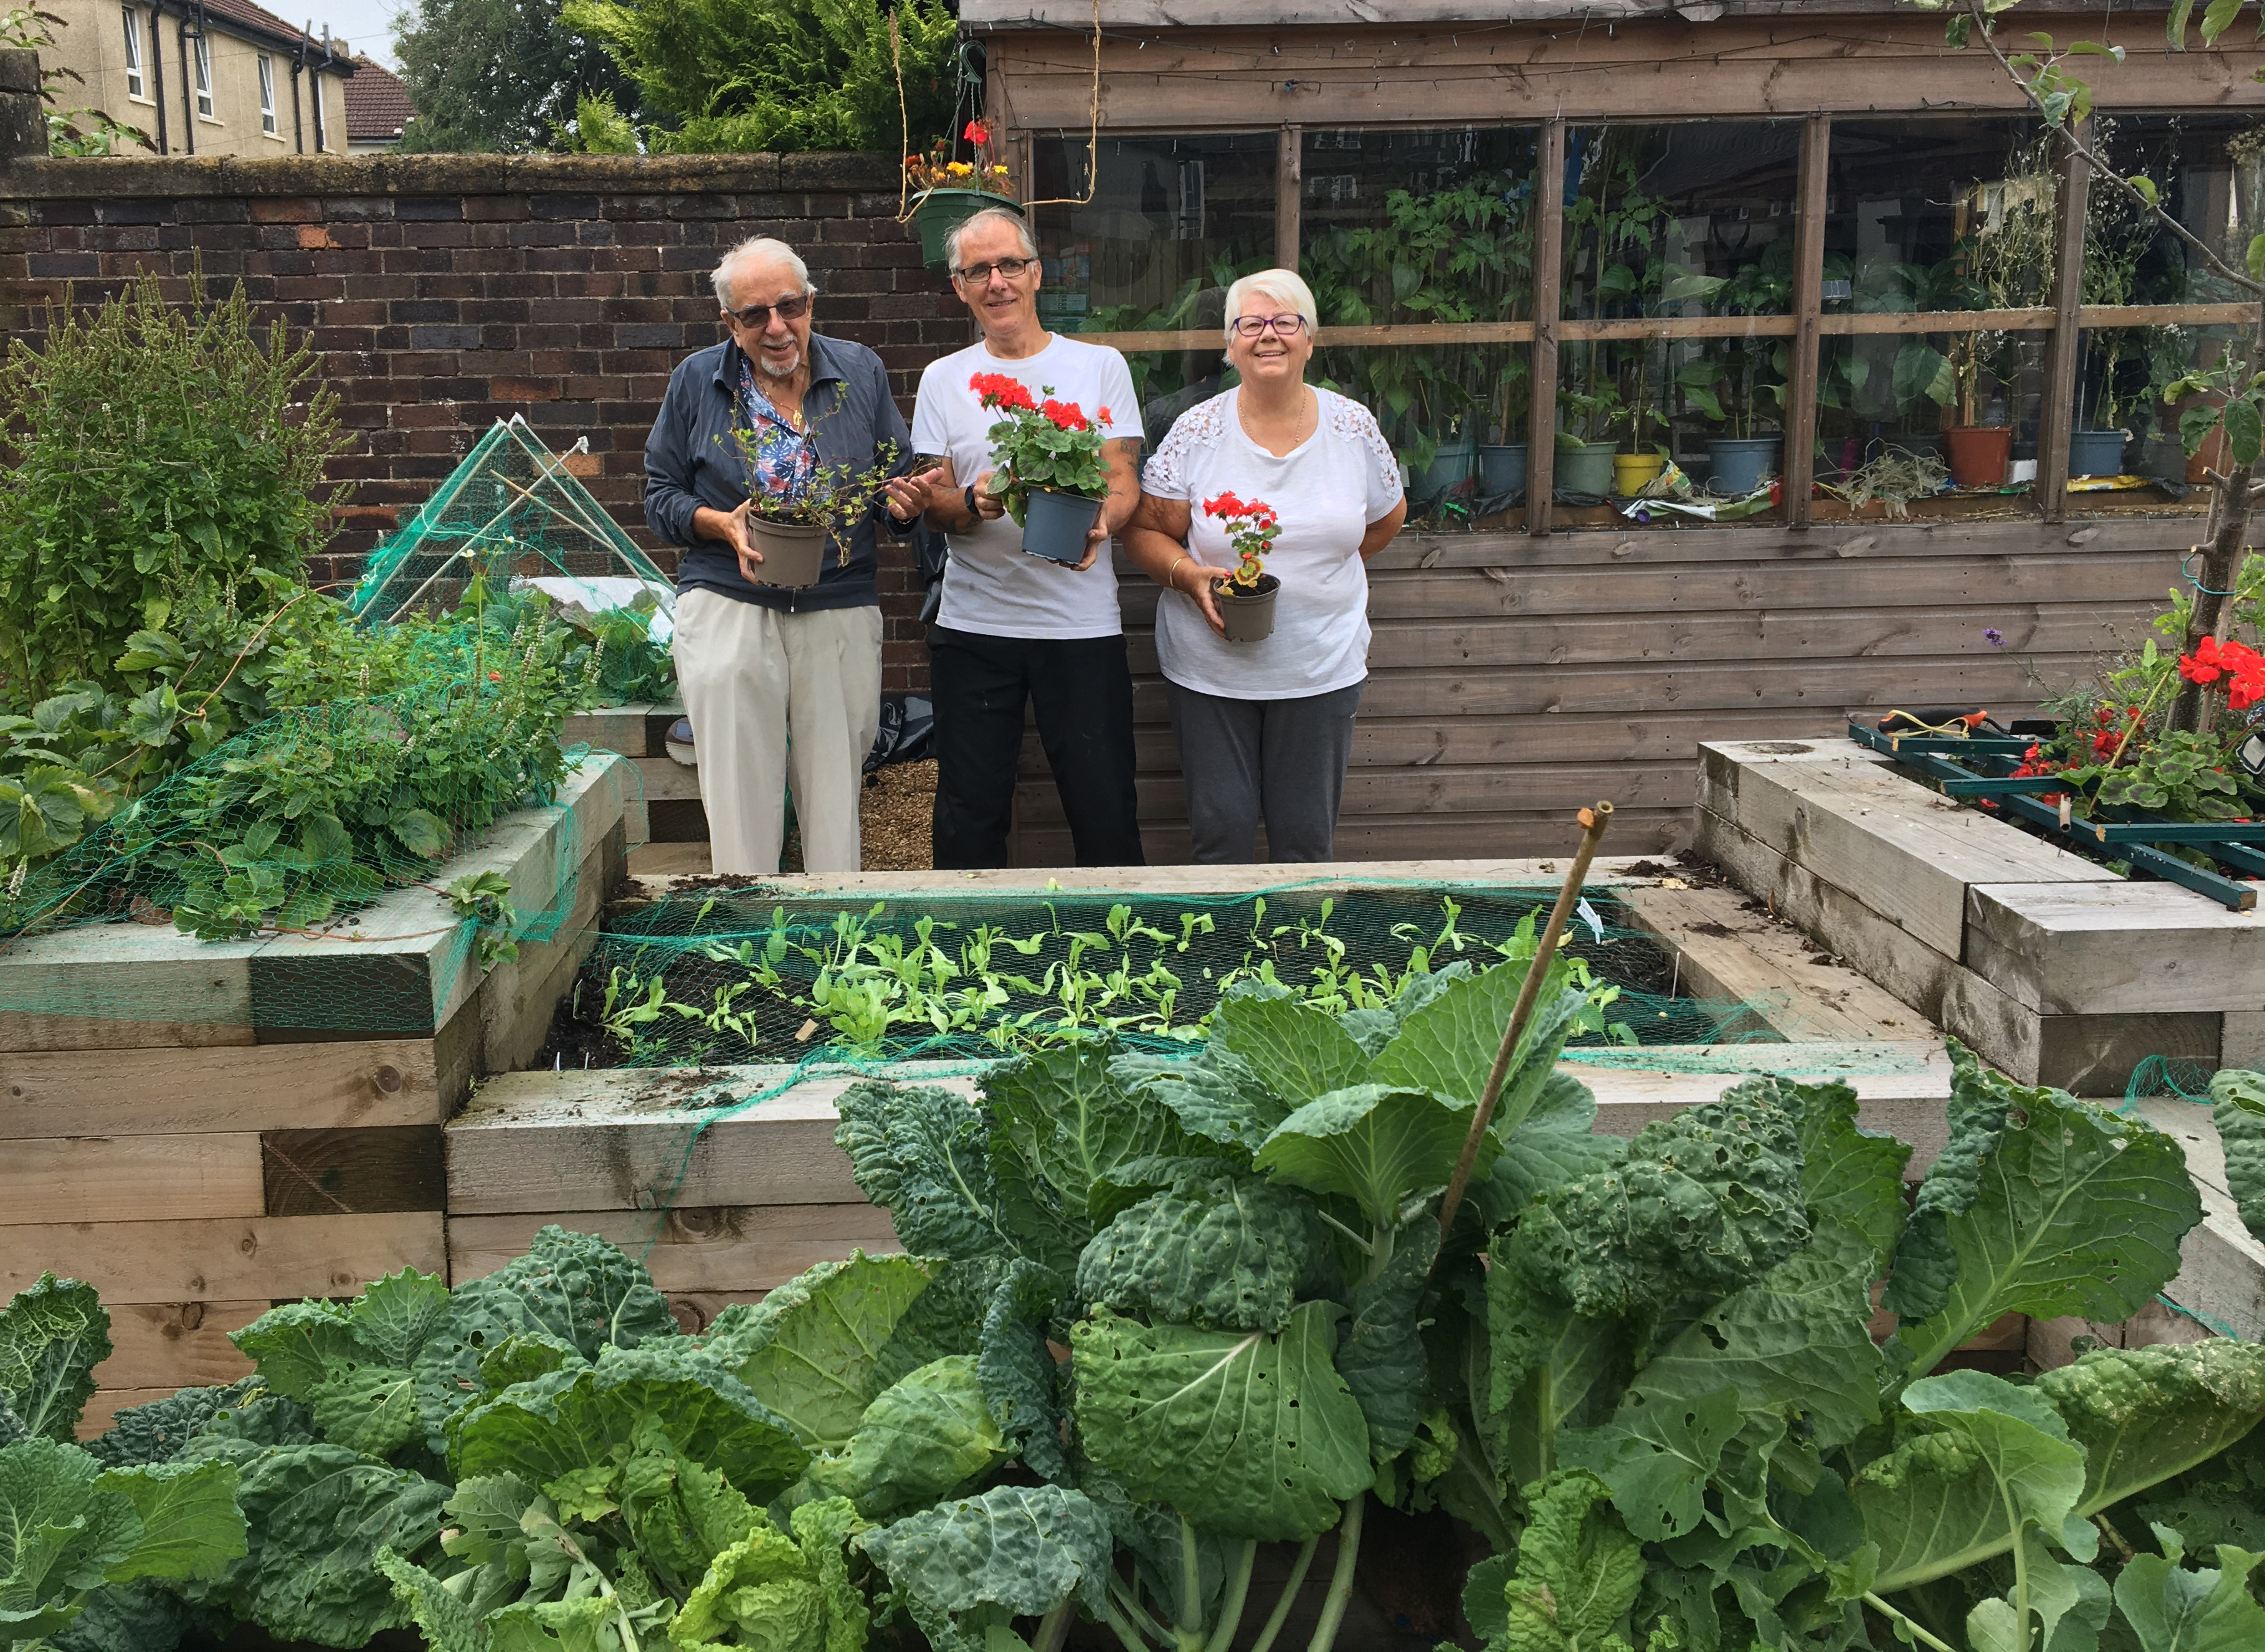 Loretto tenant brings neighbours together with new garden